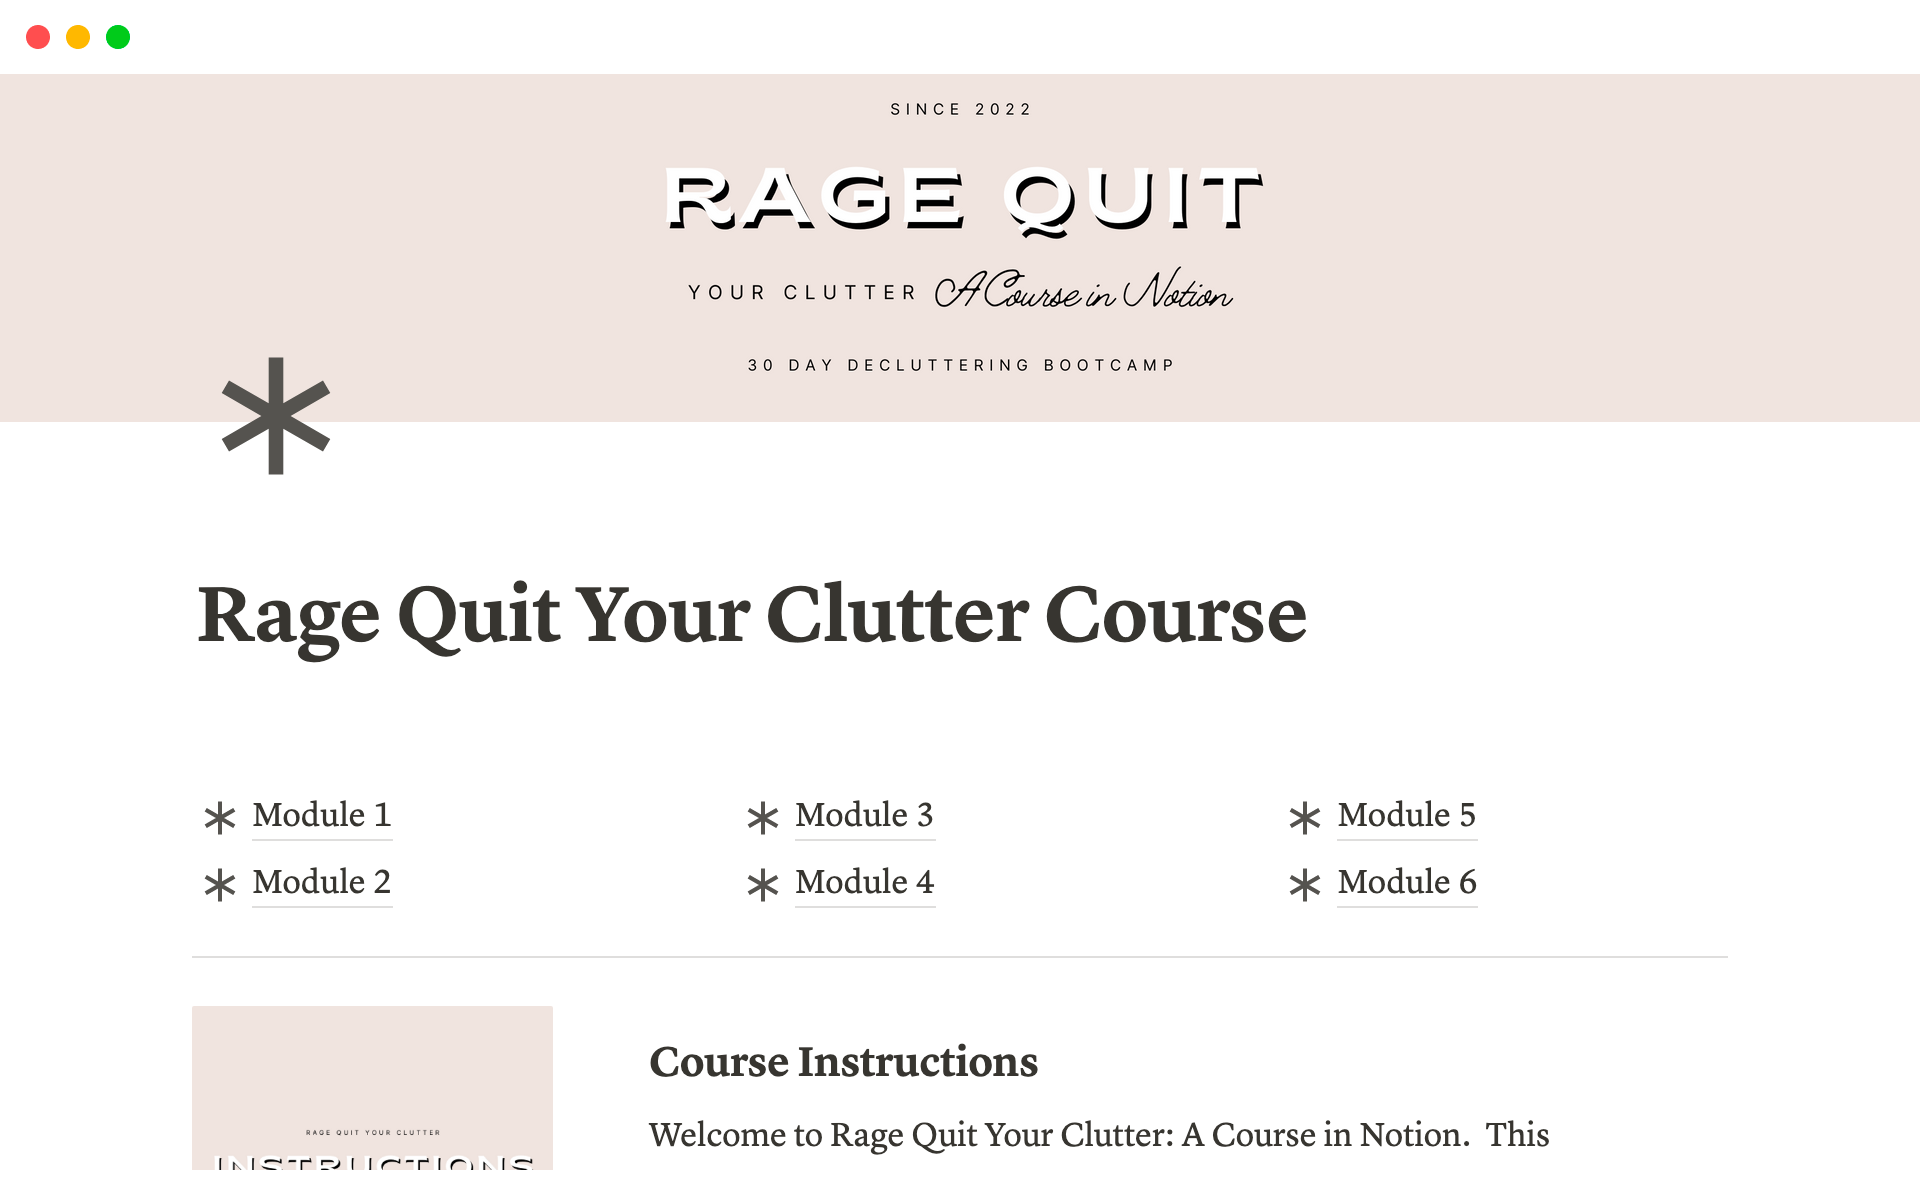 Comprehensive Decluttering Bootcamp to Declutter Your Entire Home in 30 days taught in Notion.